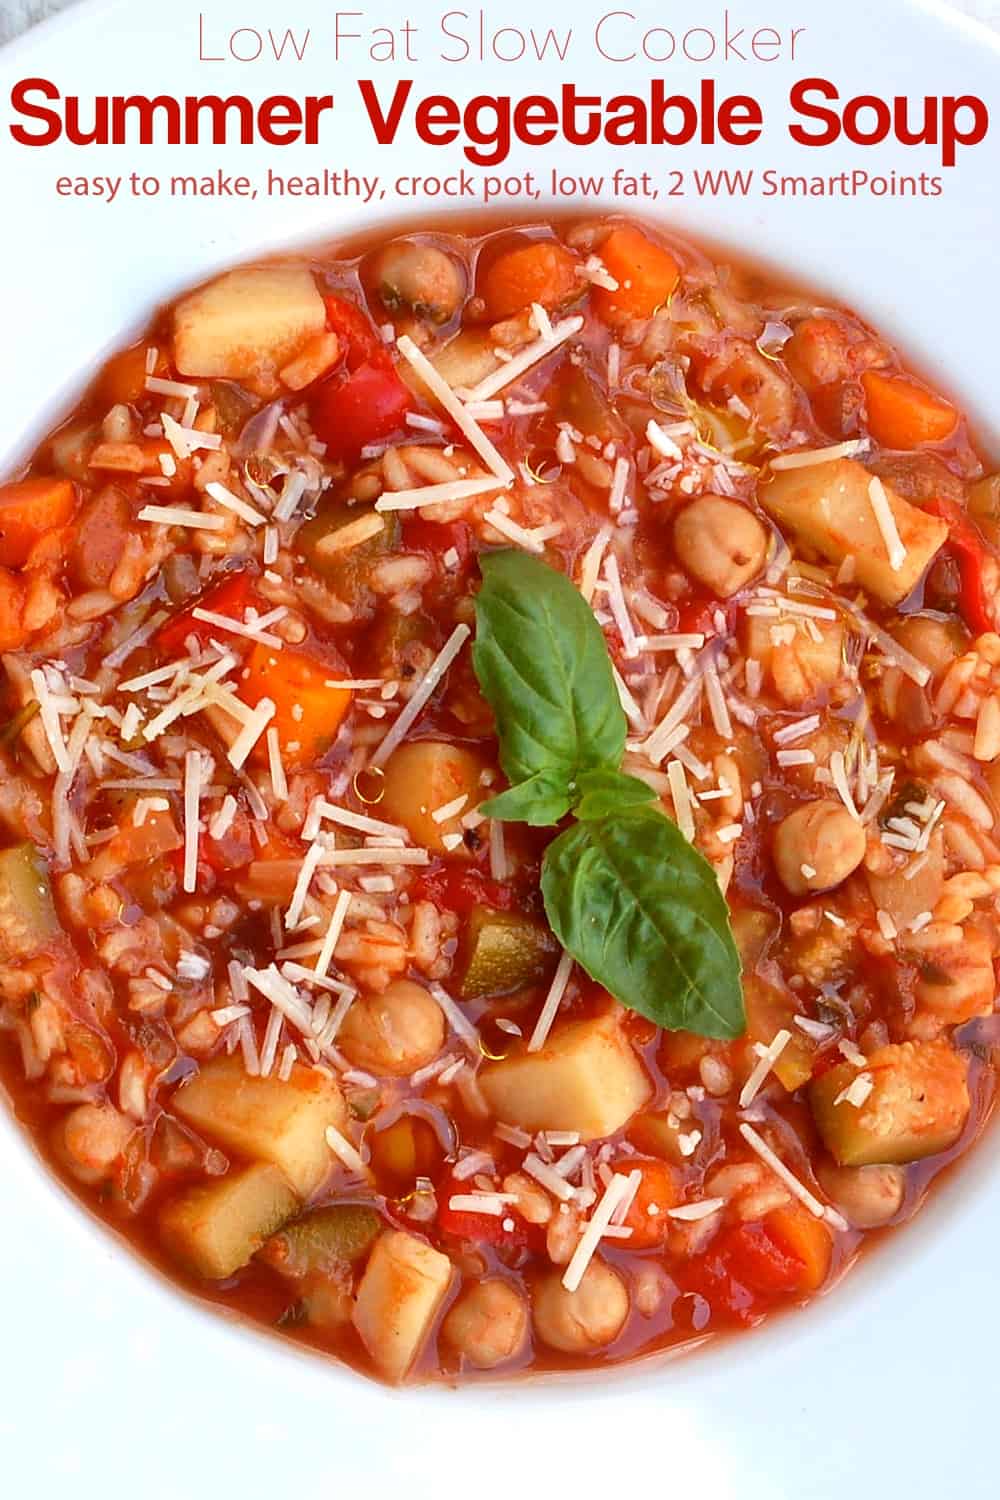 Summer Vegetable Minestrone Soup topped with fresh basil and grated Parmesan cheese in white bowl.